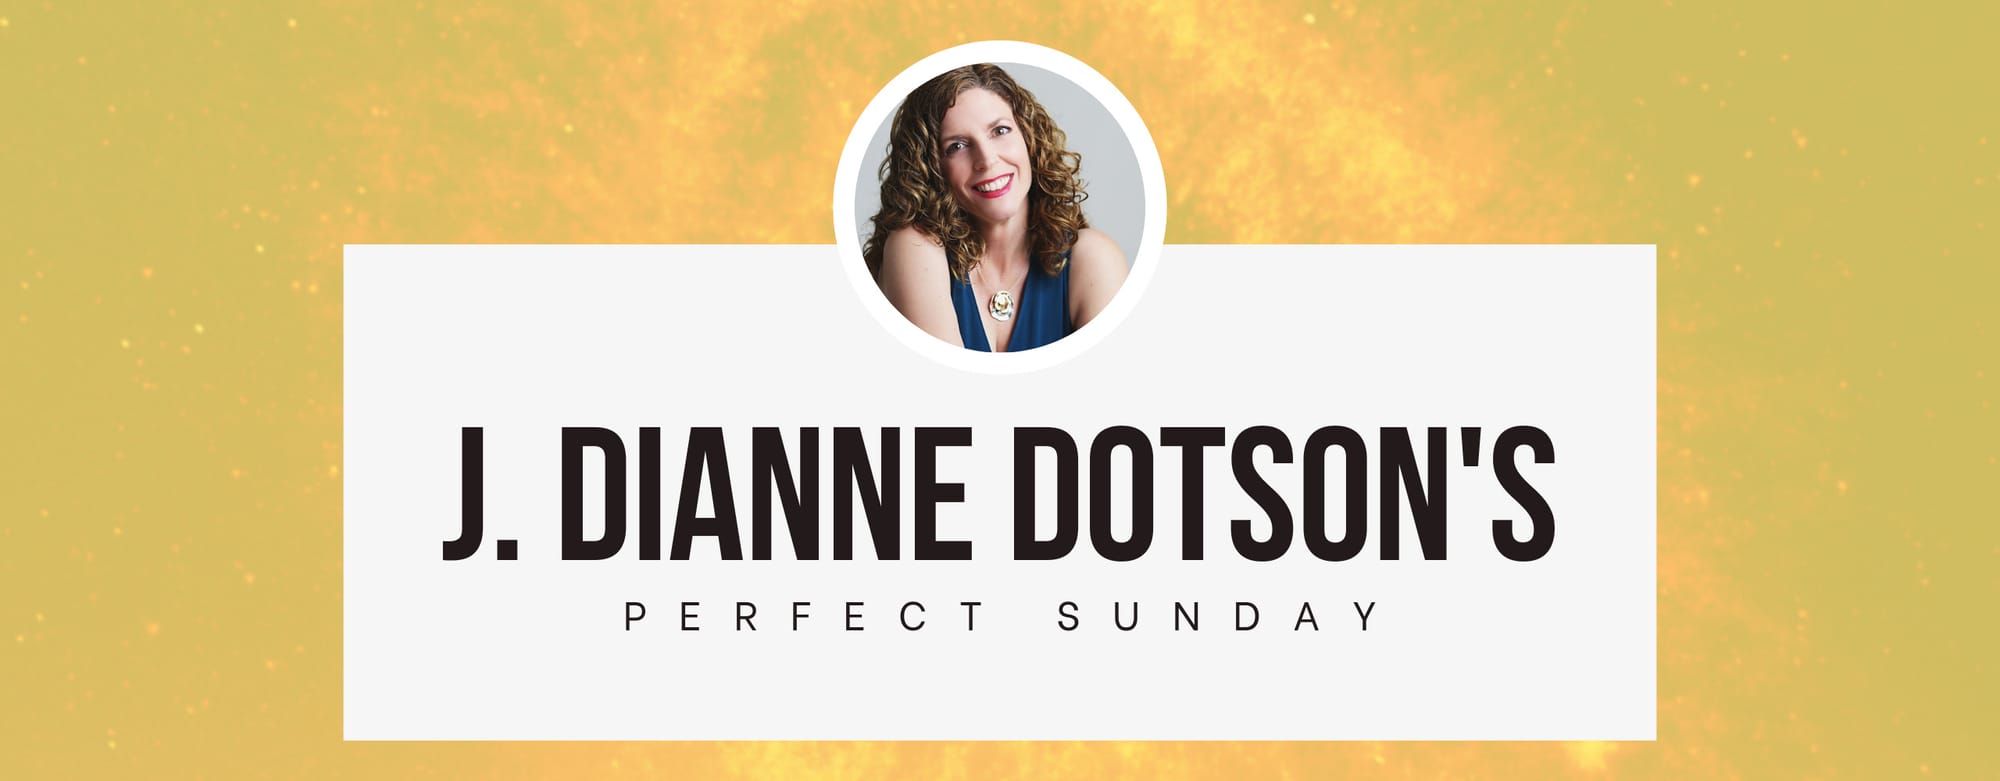 A perfect Sunday with... J. Dianne Dotson